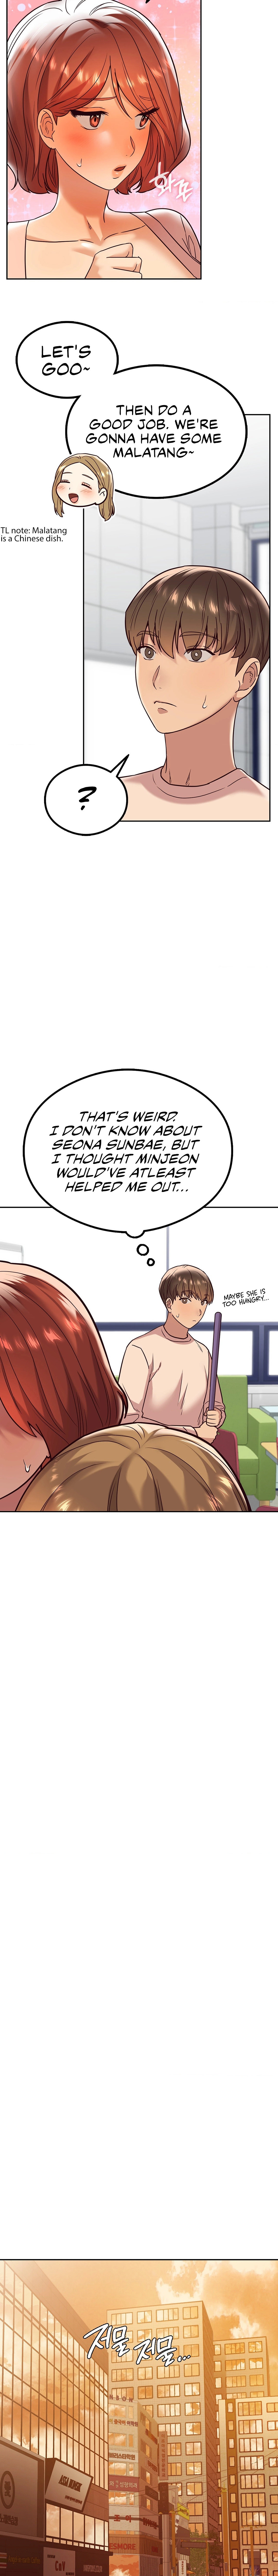 The Massage Club - Chapter 8 Page 10